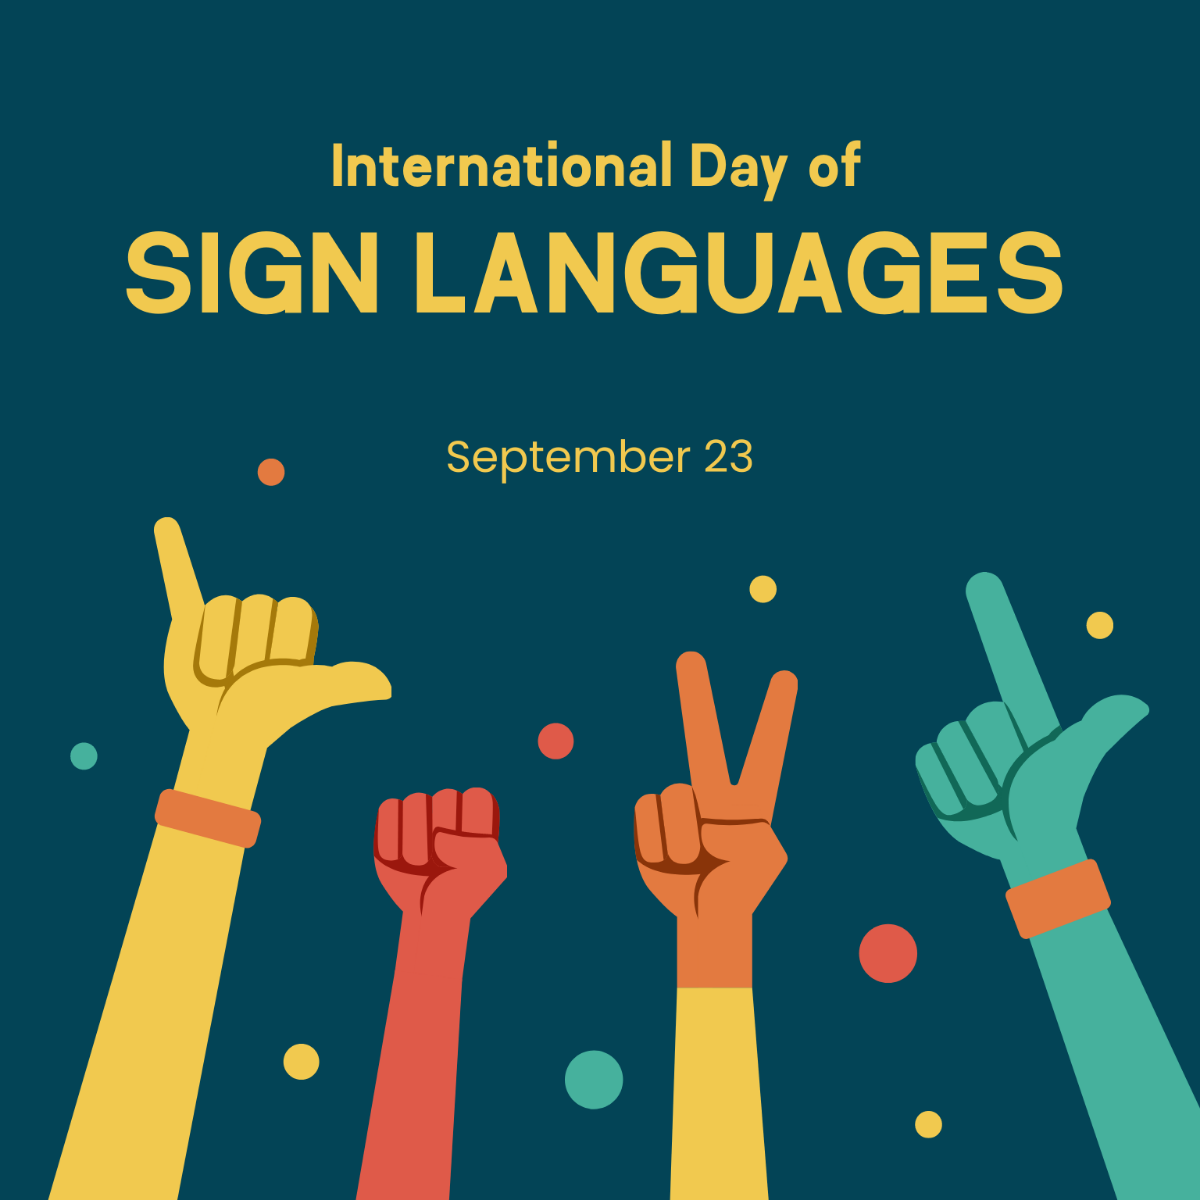 International Day of Sign Languages Flyer Vector Template